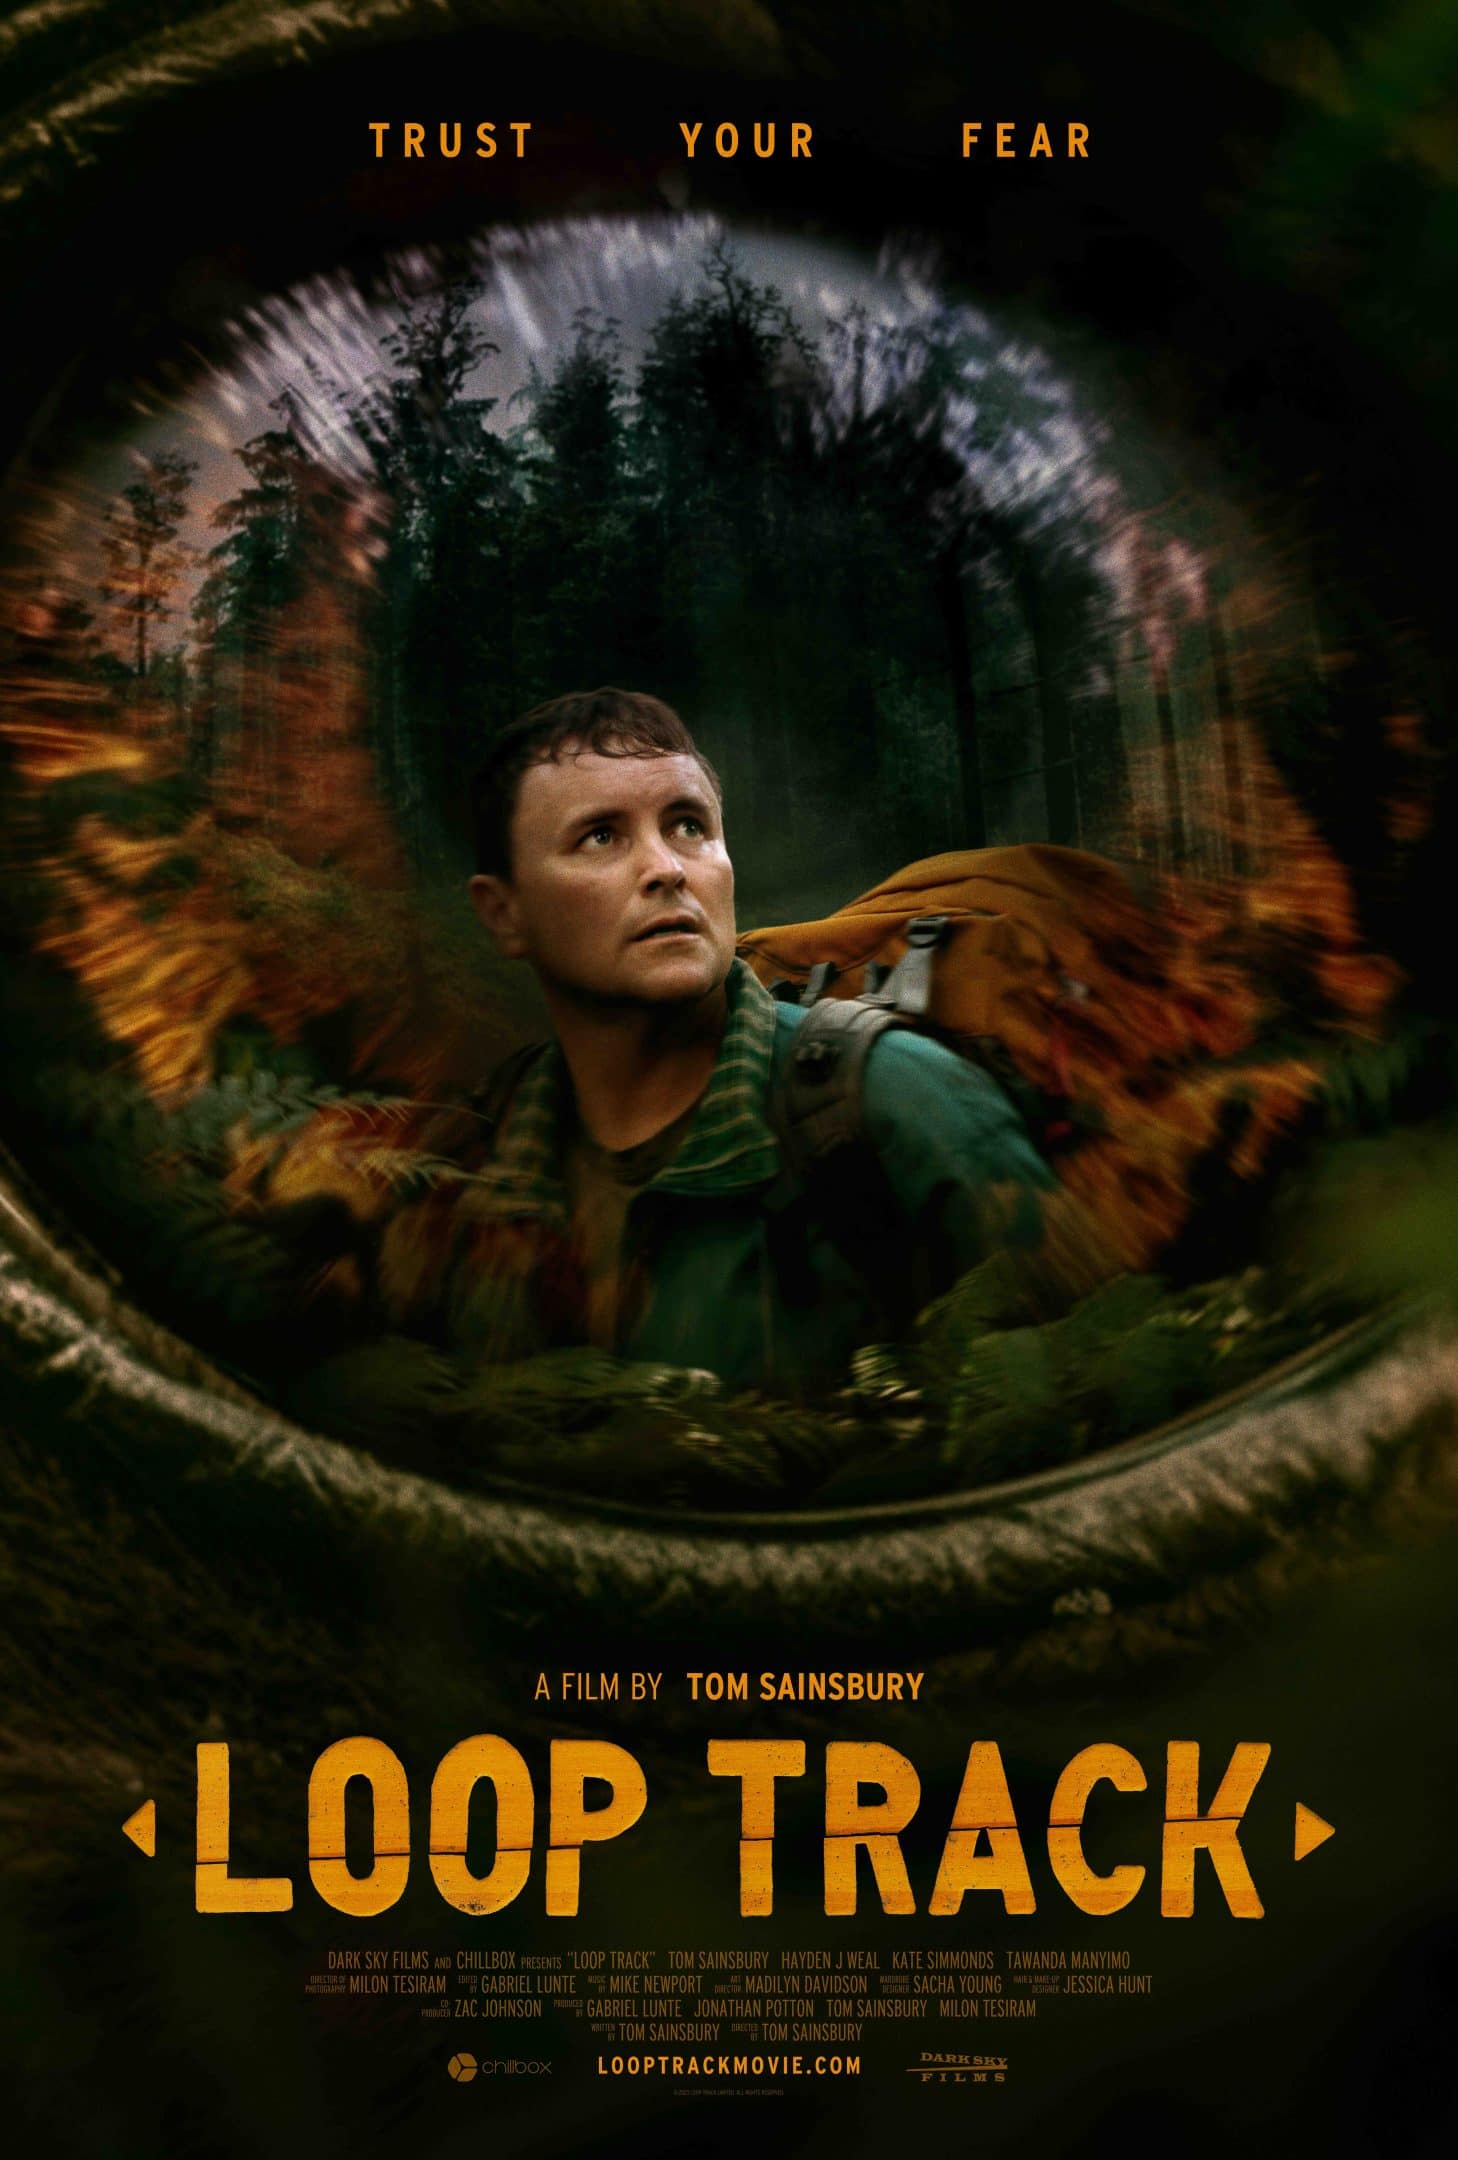 Psychological Thriller Loop Track Follows Anxious Hiker's Spiral into Madness 1